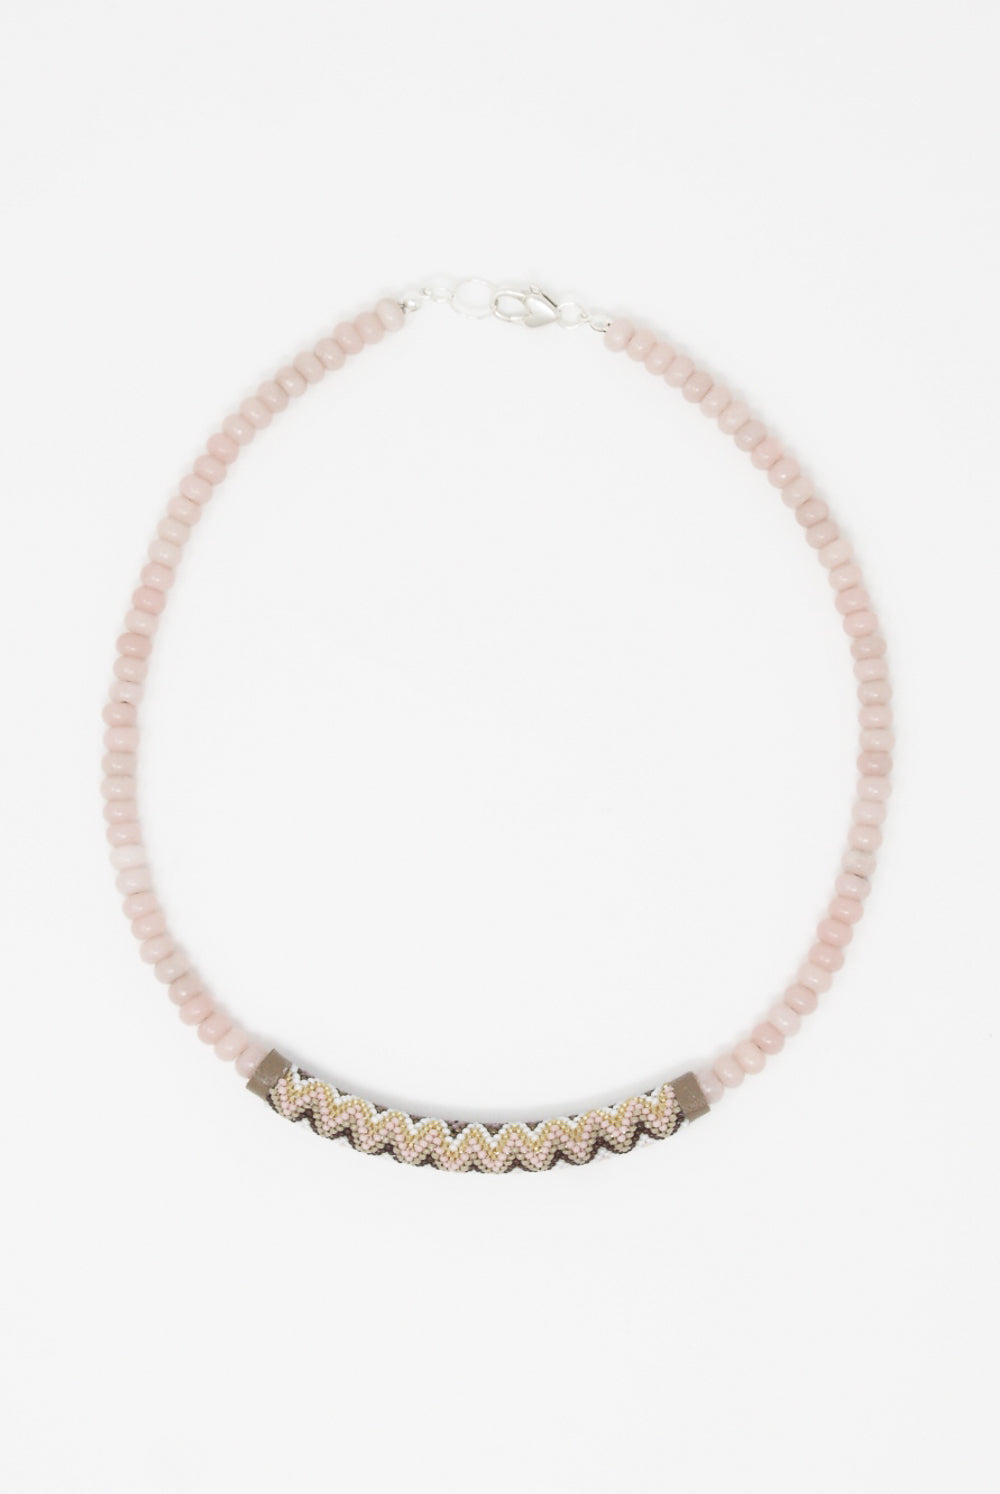 Robin Mollicone - Beaded Bar Necklace in Pink Opal